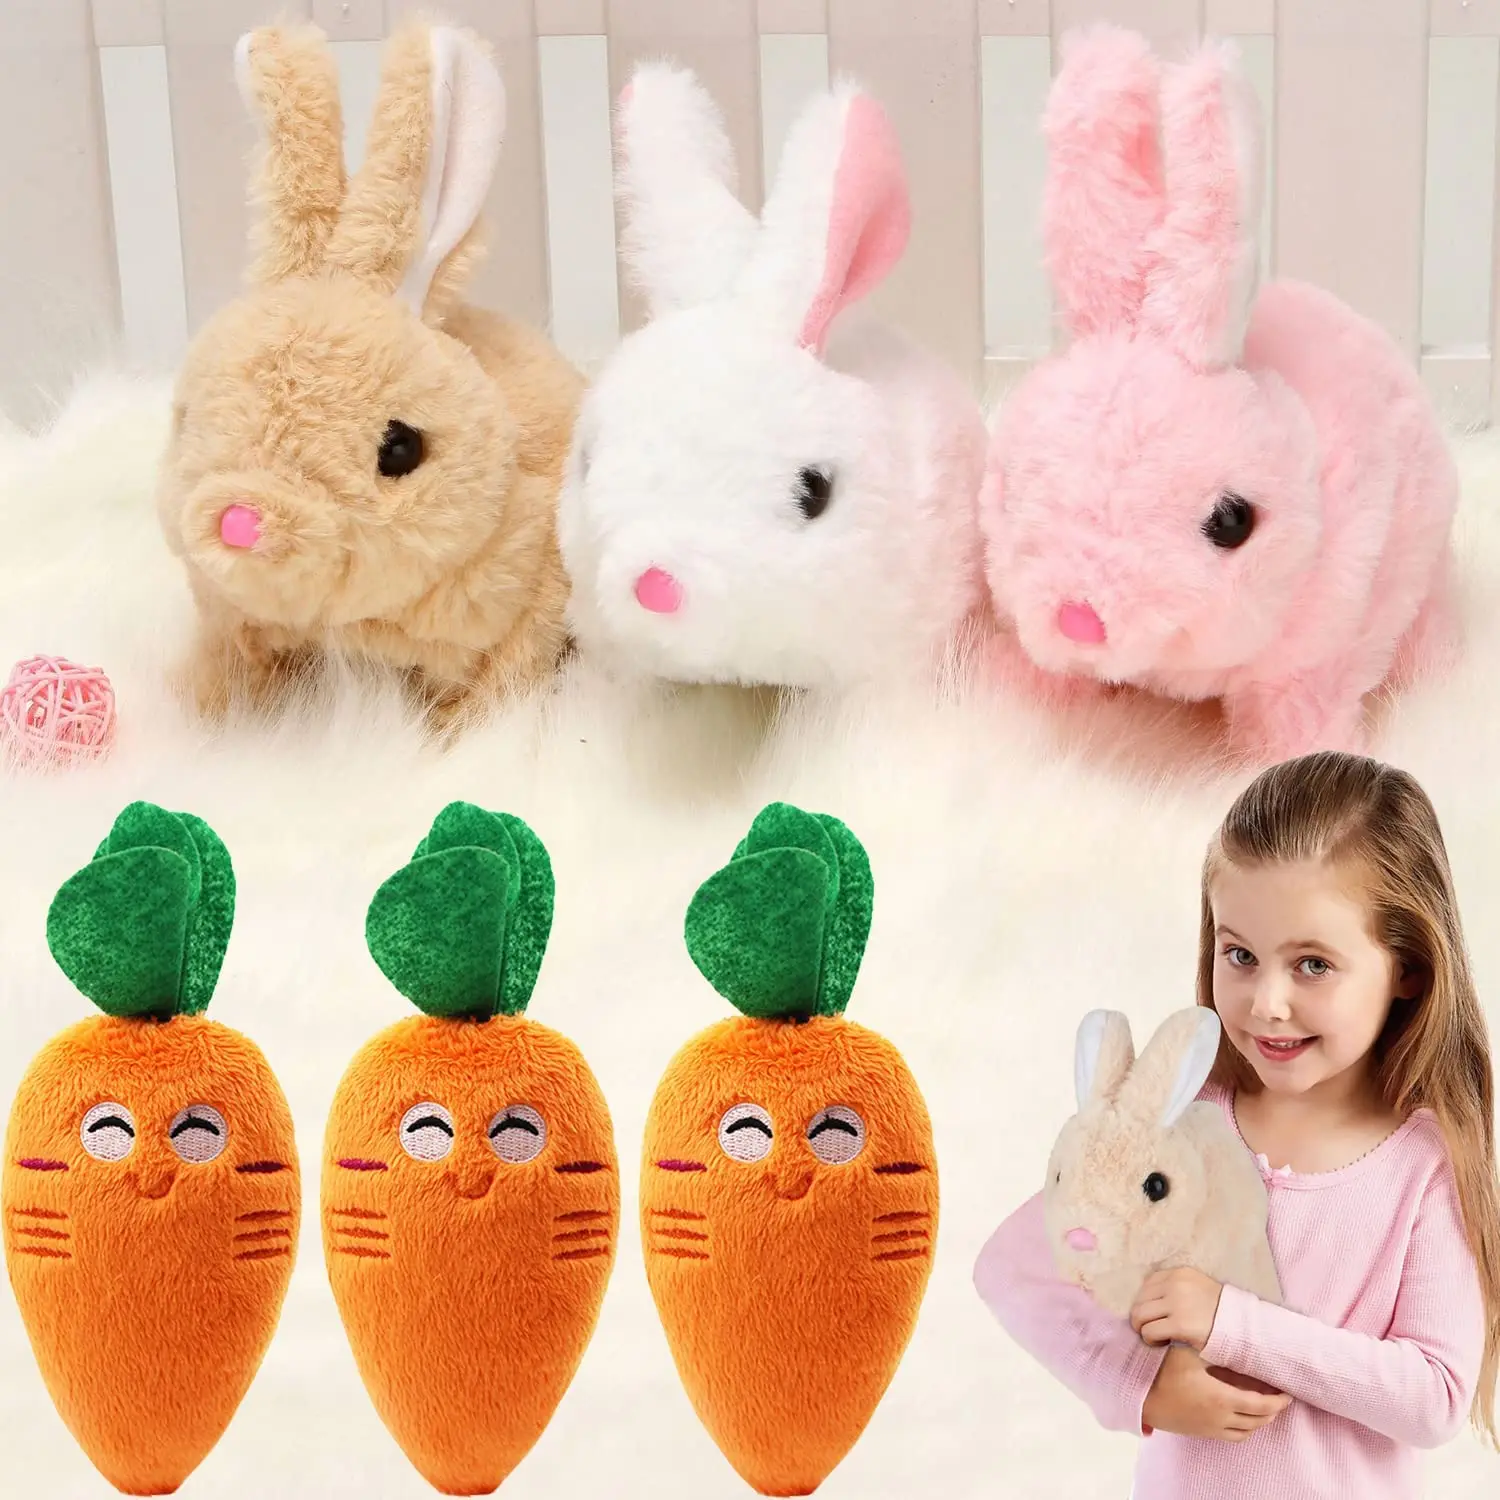 

Bunny Toys Educational Interactive Toys Bunnies Can Walk and Talk, Easter Plush Stuffed Bunny Toy Walking Rabbit Educational Toy